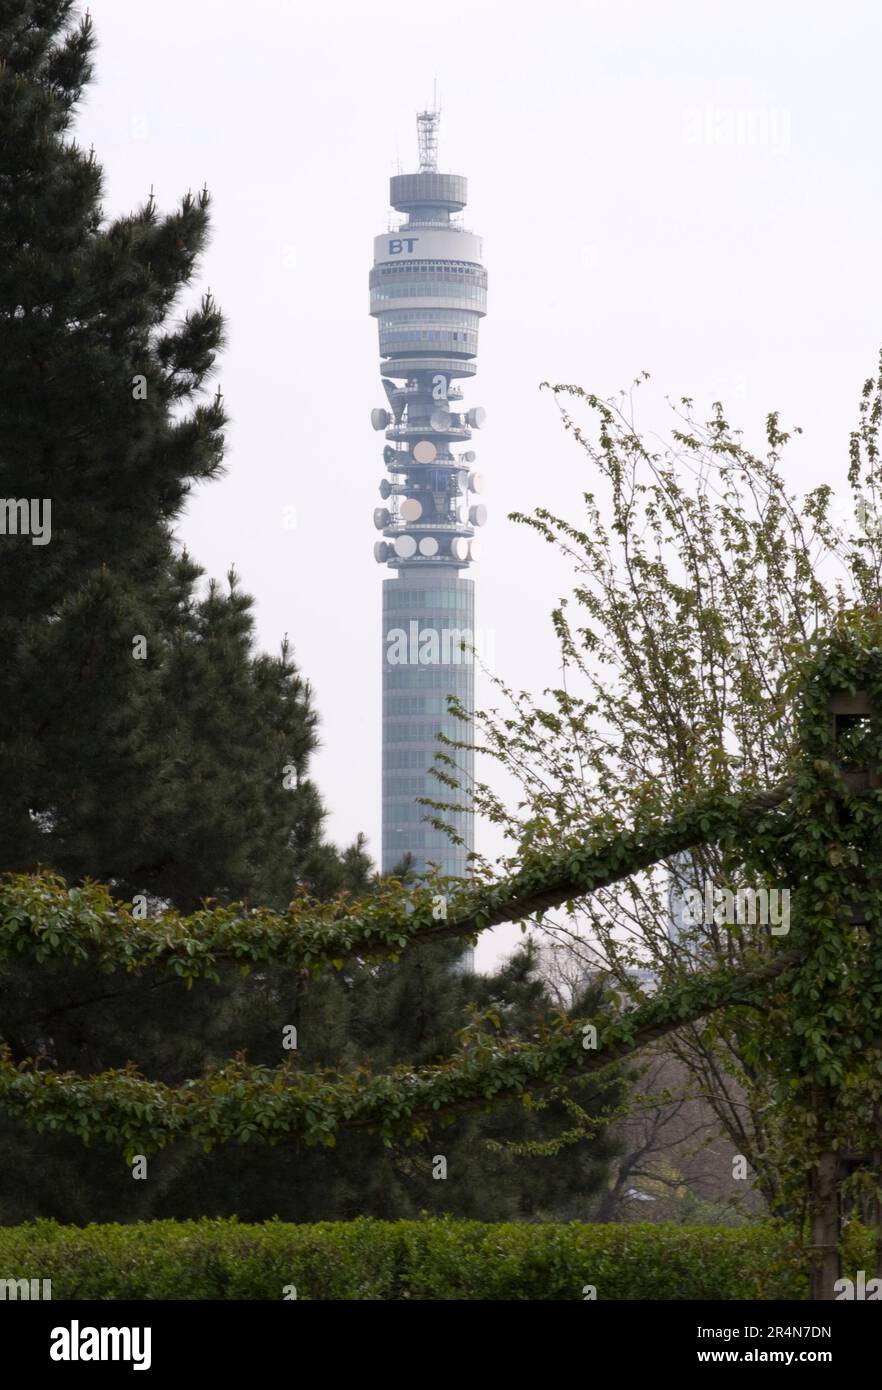 Telecom Tower viewed from Regents Park Stock Photo